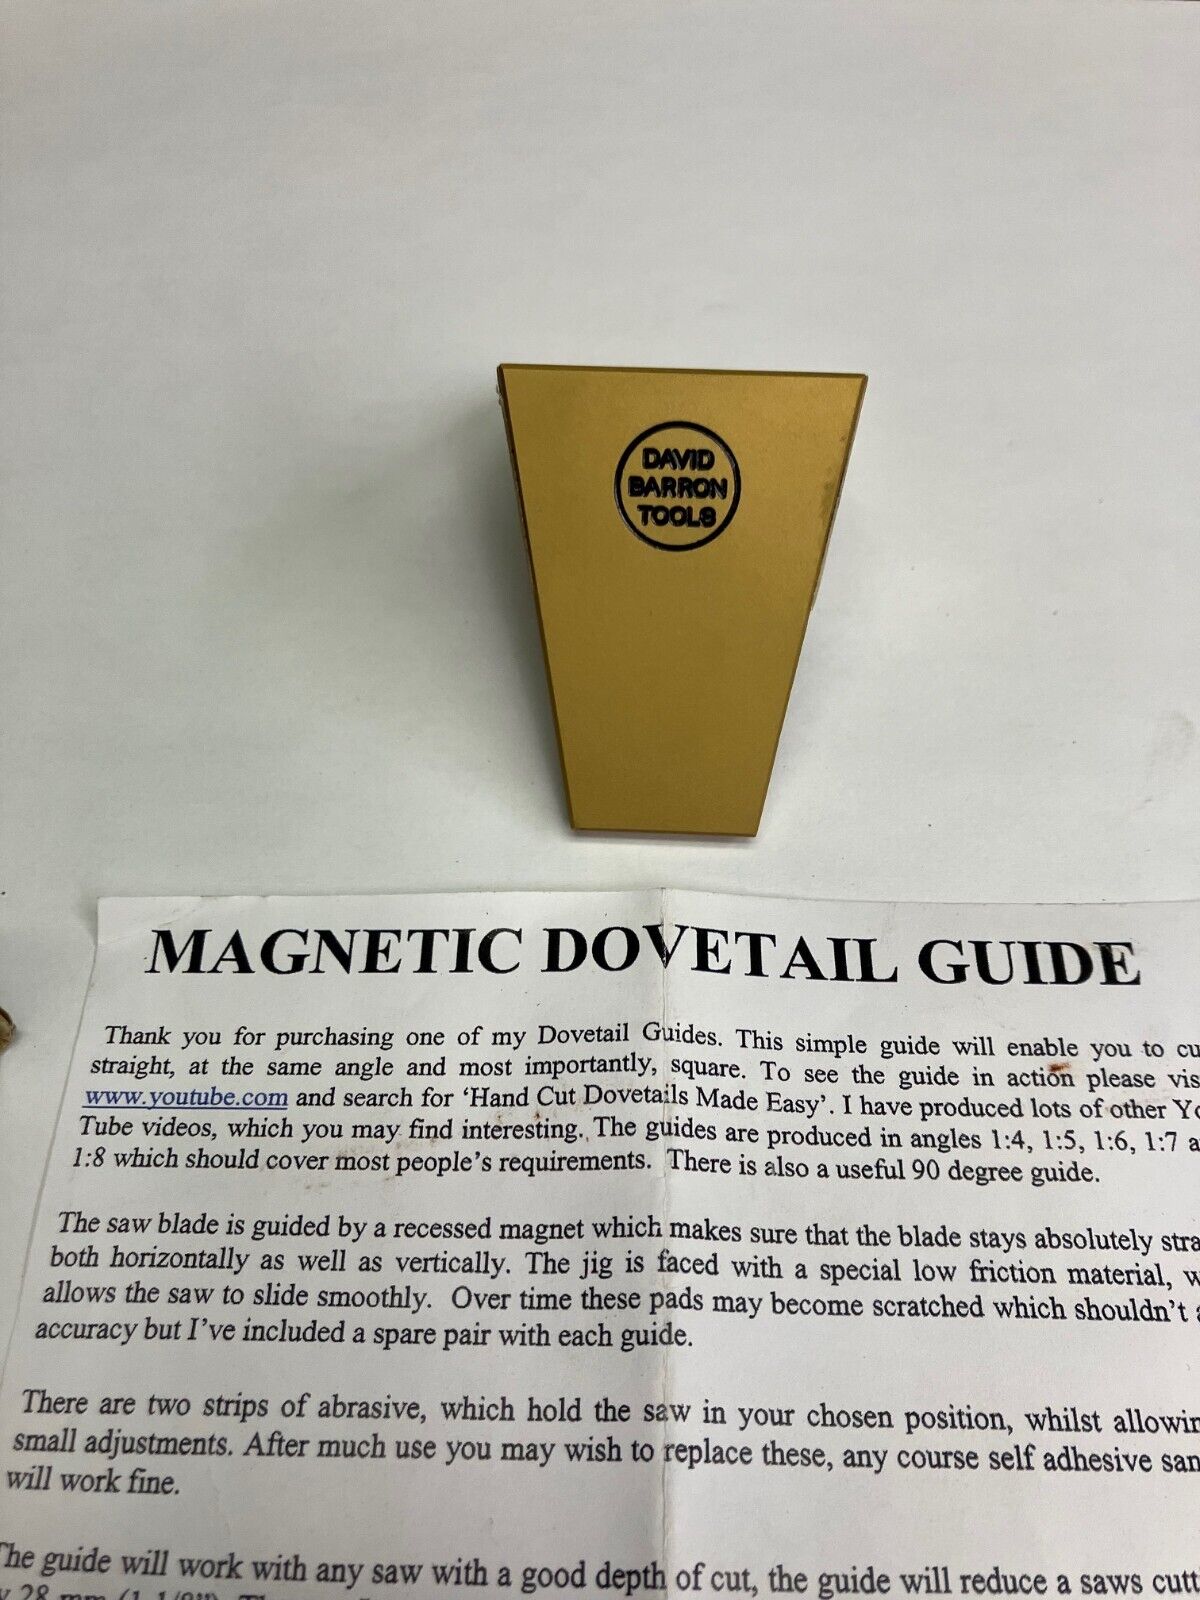 DOVETAIL GUIDE BY DAVID BARRON  1:6 TOOLS FOR FINE WOODWORKING 